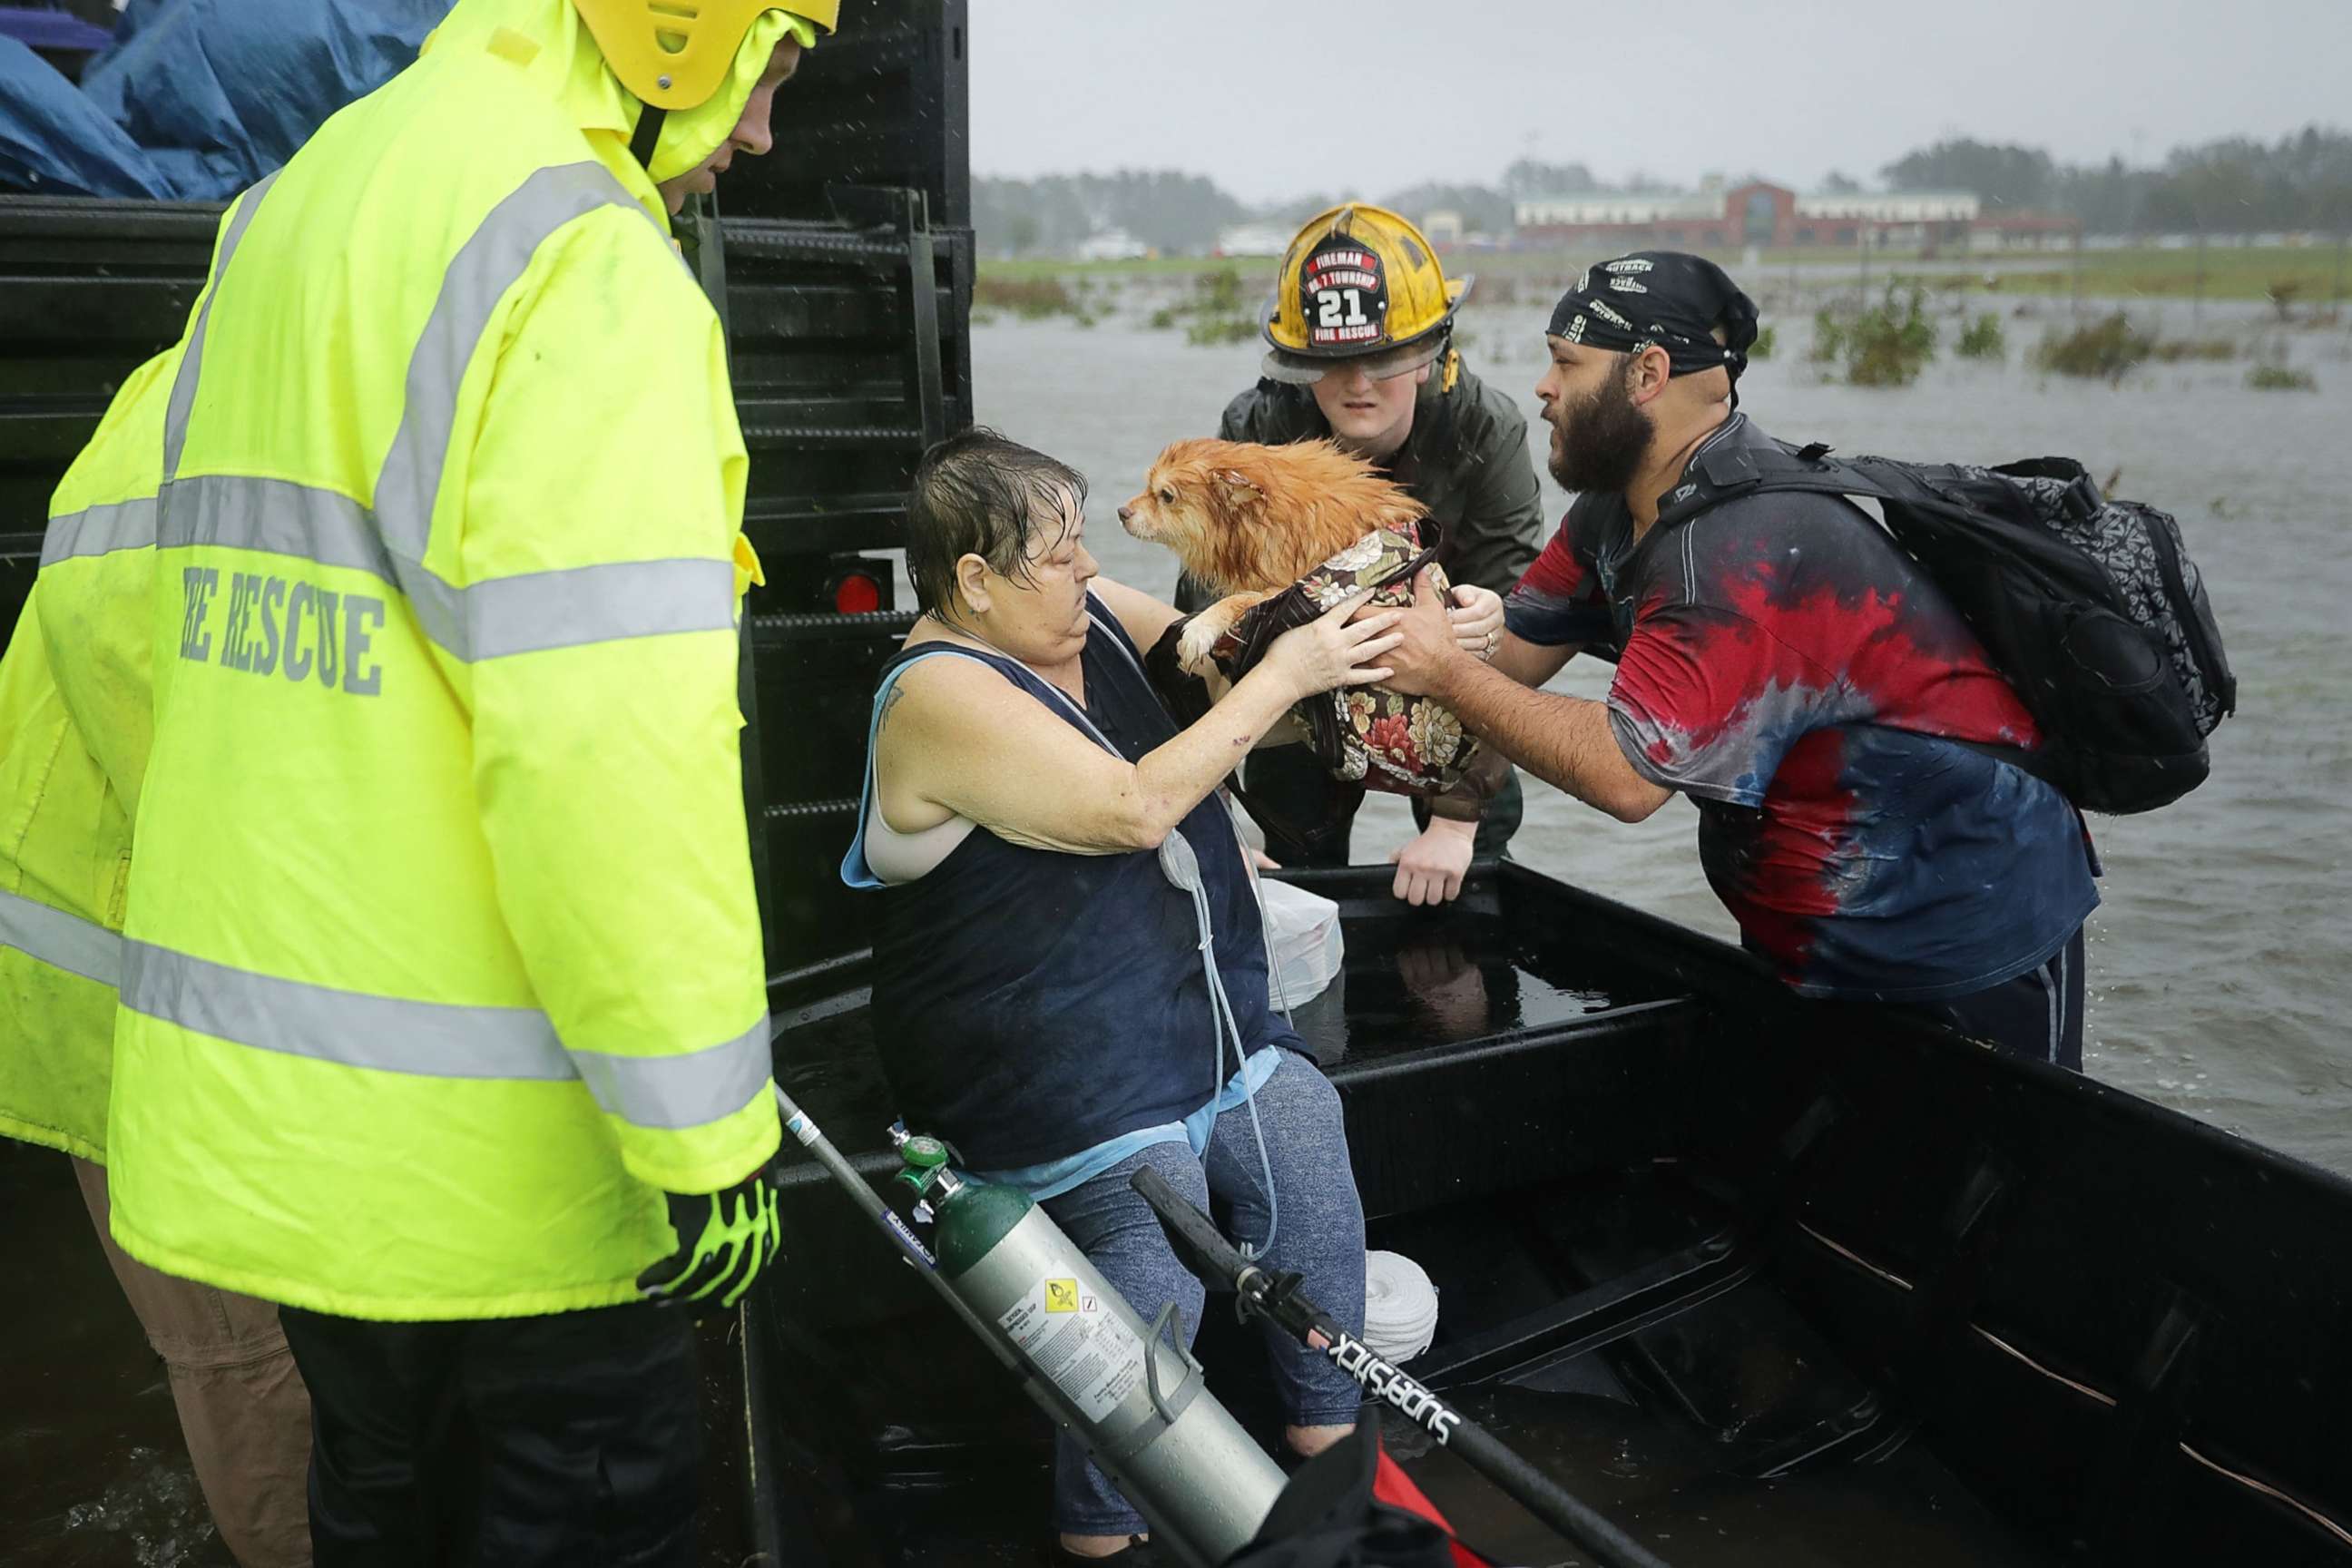 PHOTO: Rescue workers from Township No. 7 Fire Department and volunteers from the Civilian Crisis Response Team help rescue a woman and her dog from their flooded home during Hurricane Florence, Sept. 14, 2018, in James City, N.C.